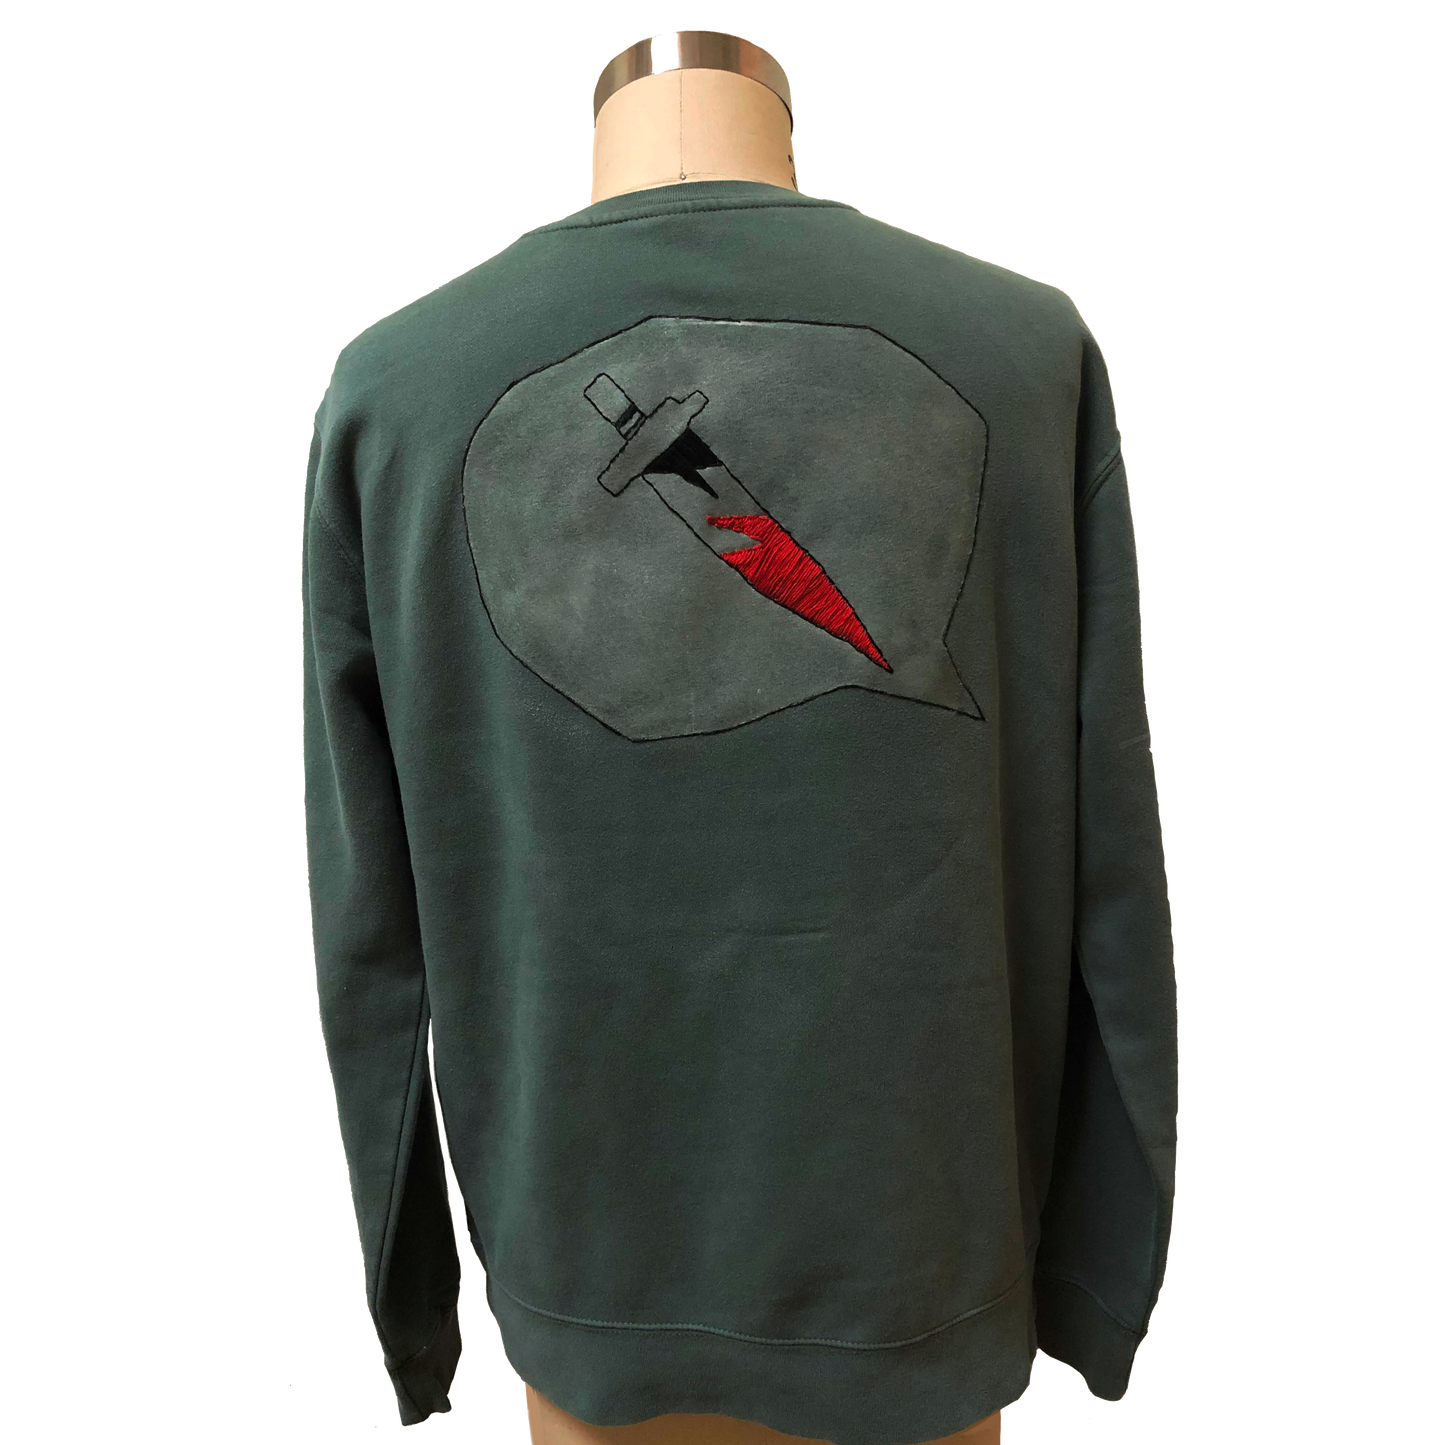 Back view of Snaek Attack sweater that depicts a bloody knife in a speechbubble.